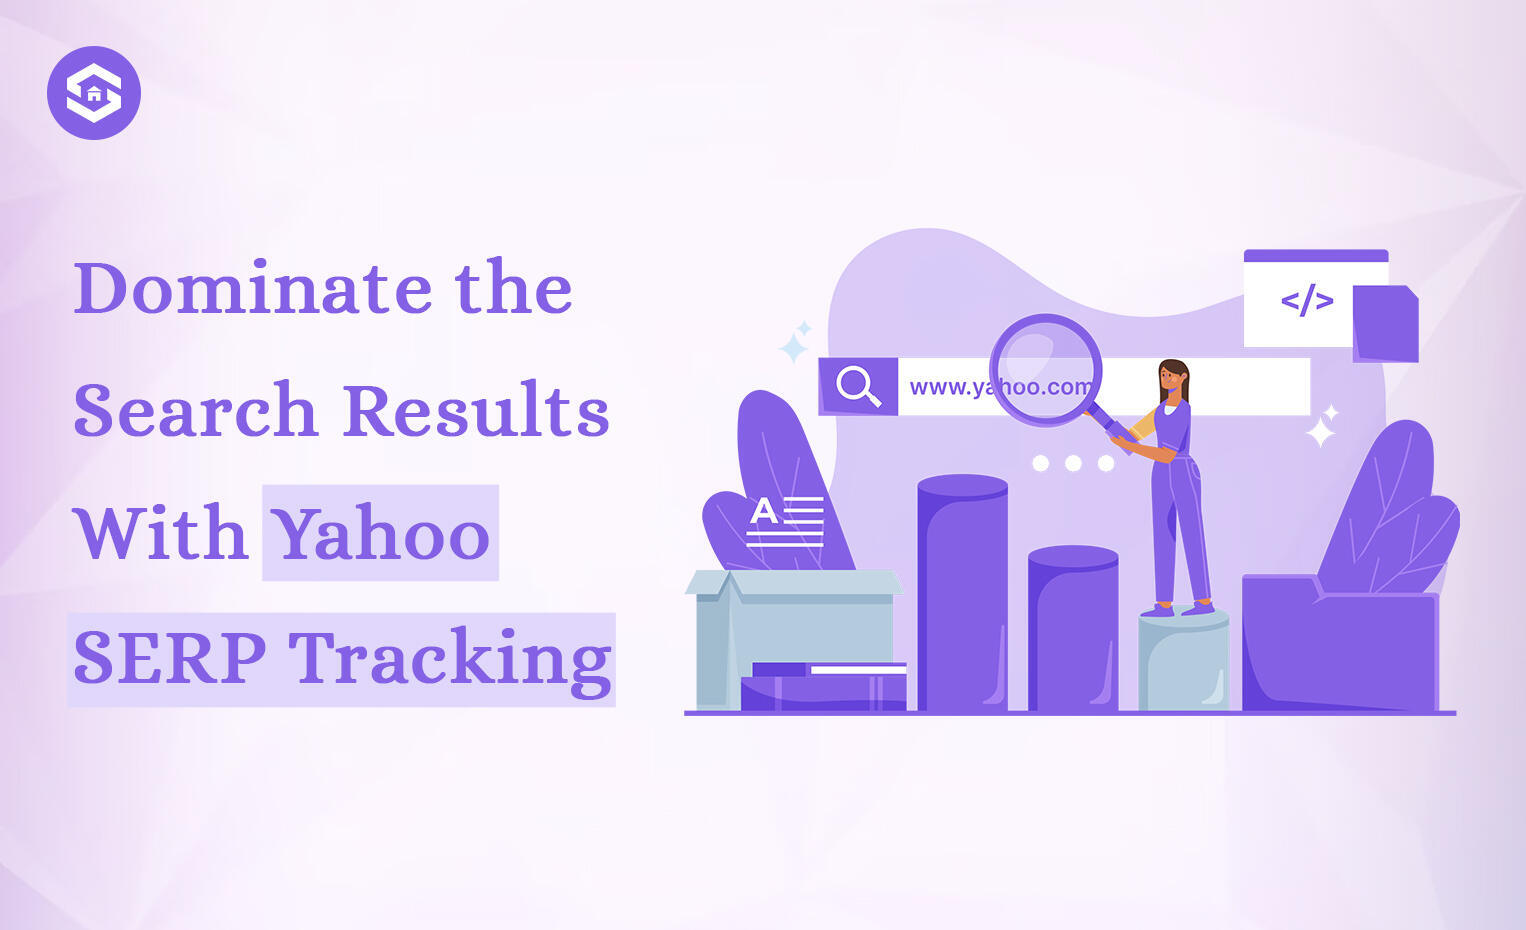 Dominate the Search Results With Yahoo SERP Tracking